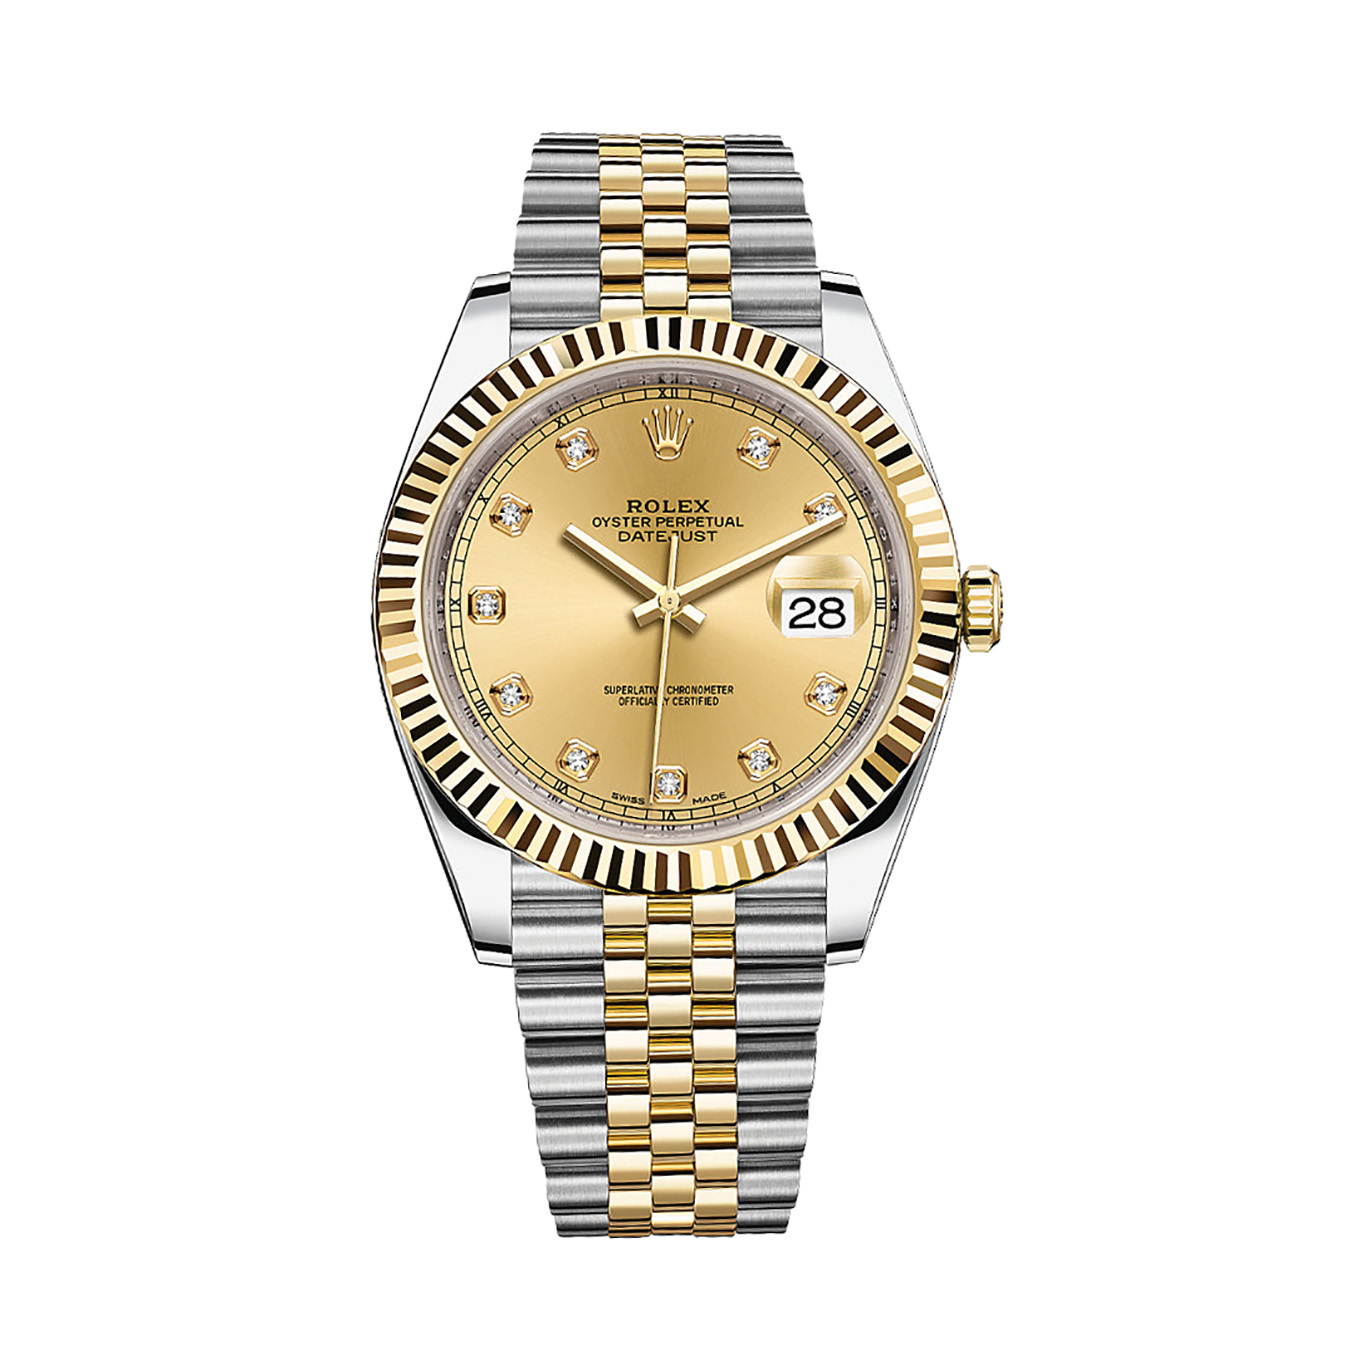 Datejust 41 126333 Gold & Stainless Steel Watch (Champagne Set With Diamonds)